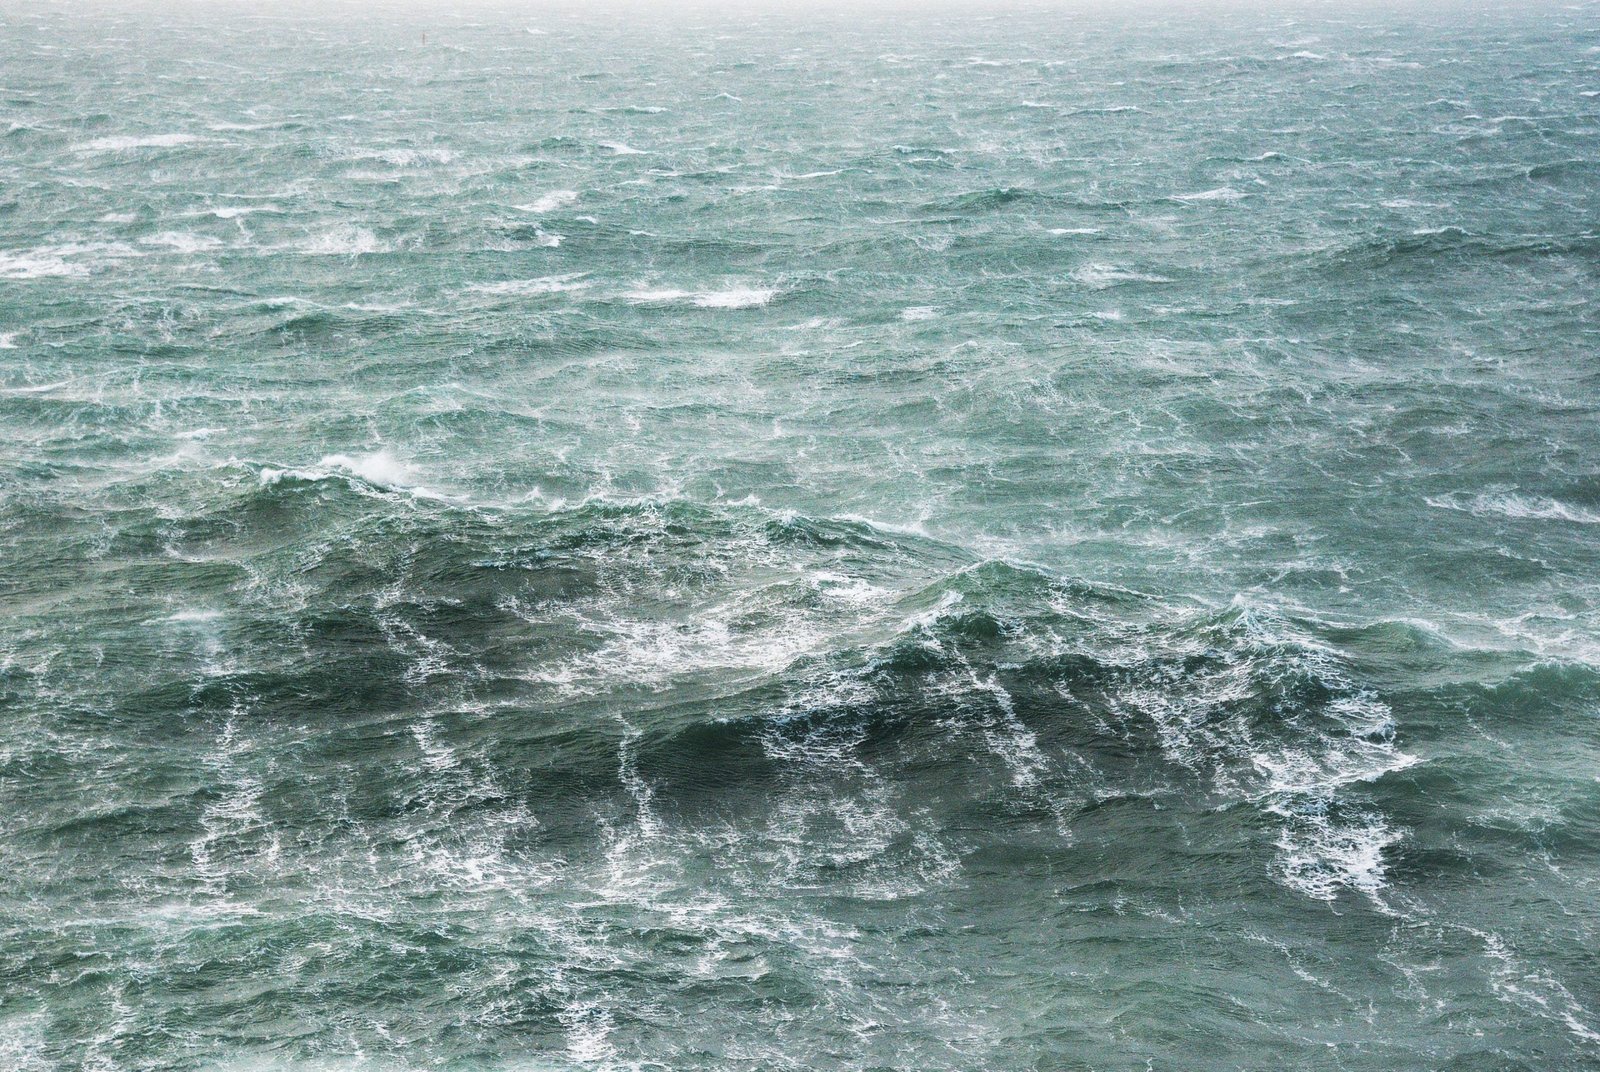 Paul Duncombe - photo of waves from previous project